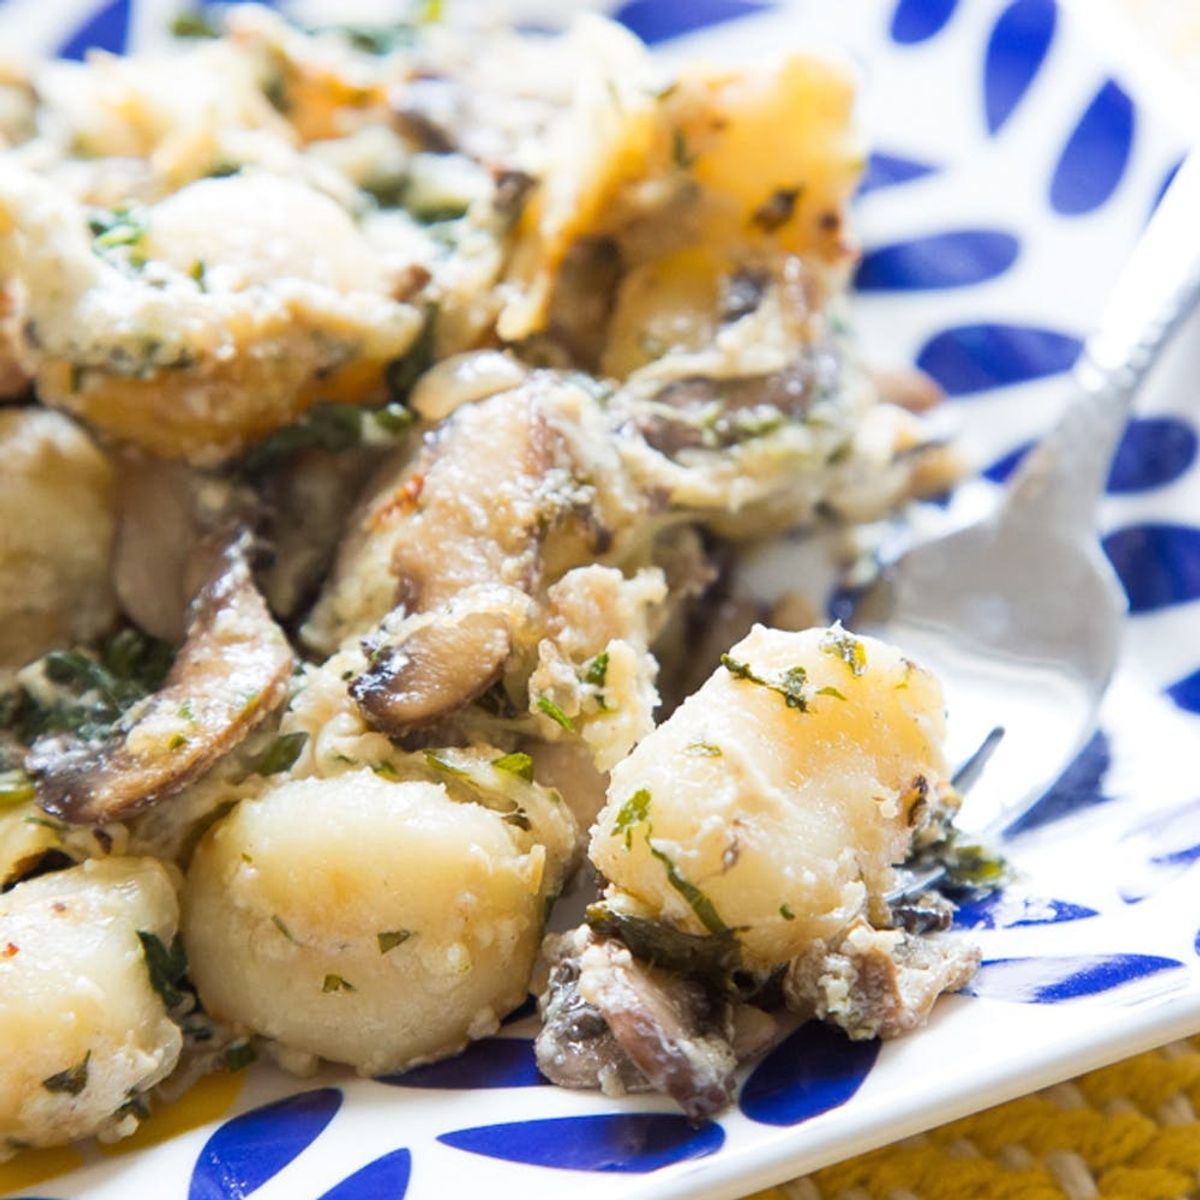 This Make-Ahead Spinach + Mushroom Gnocchi Casserole Is Perfection